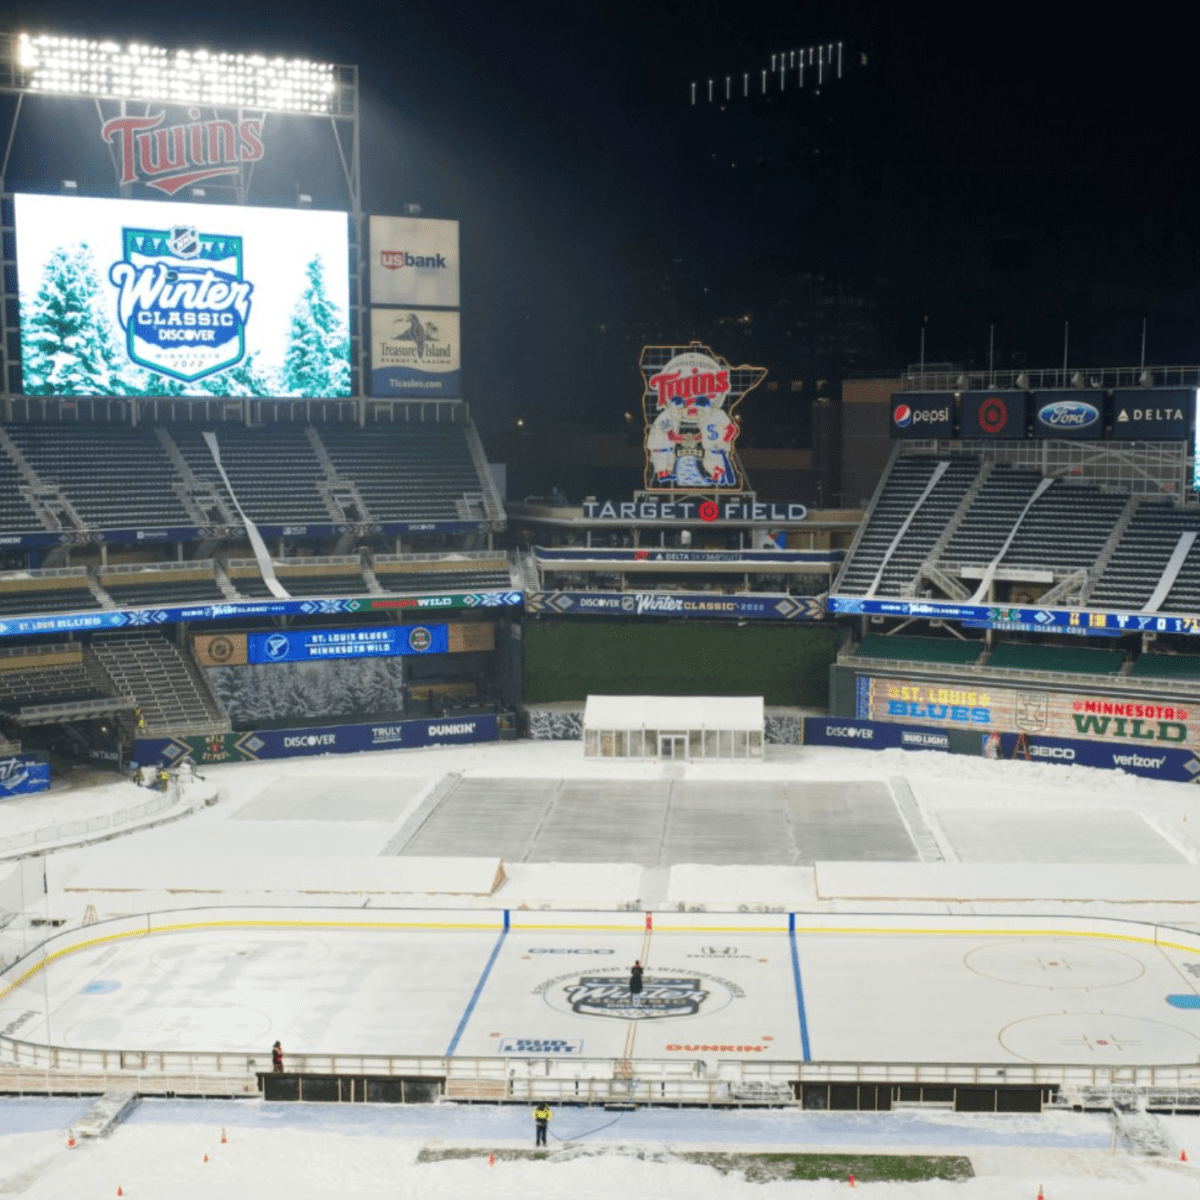 Winter Classic 2016: TV, time, uniforms, weather